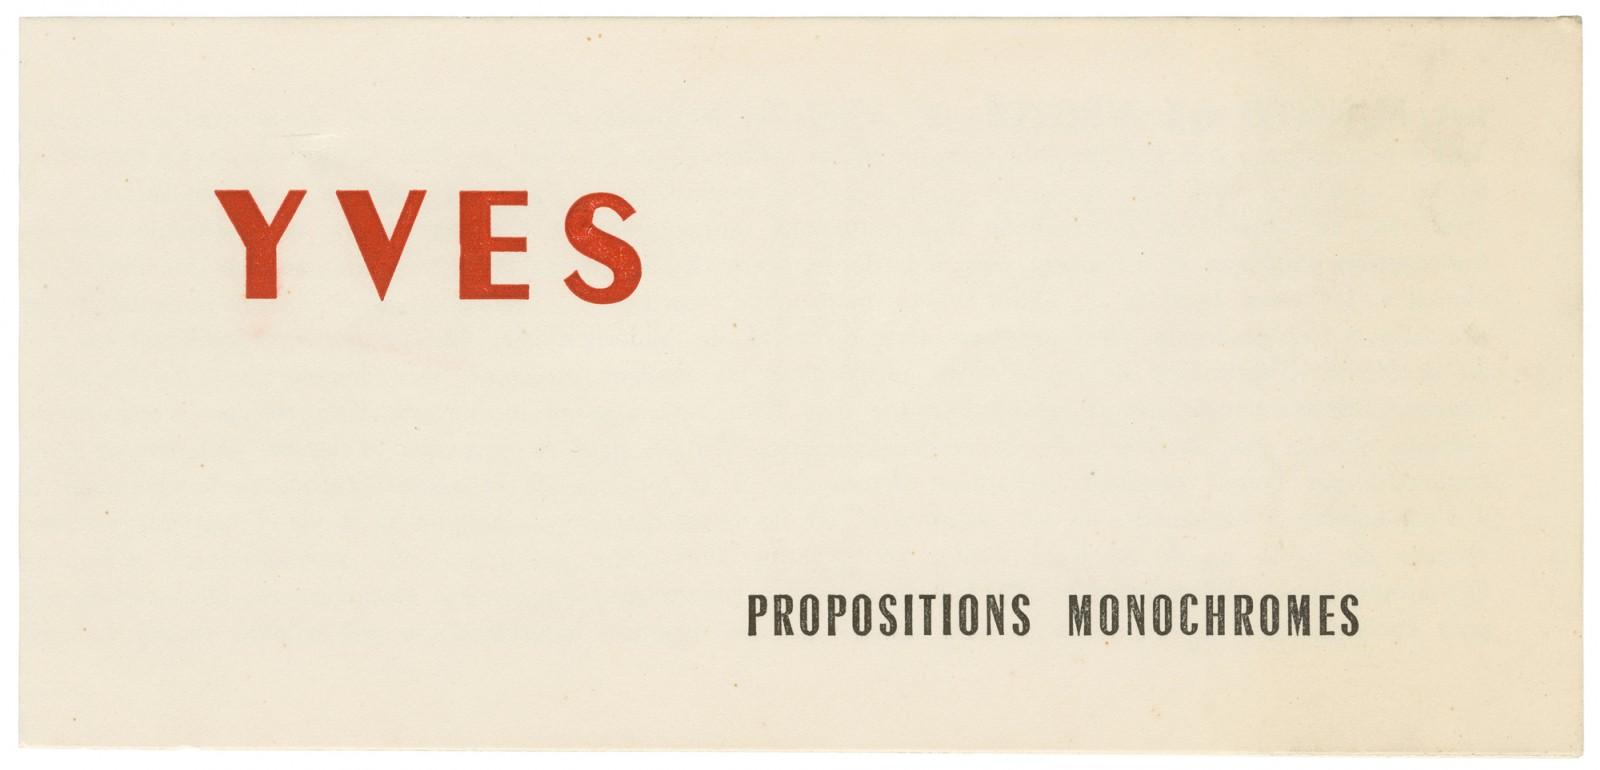 Invitation card for the exhibition "Yves Monochrome Proposals" at Colette Allendy gallery